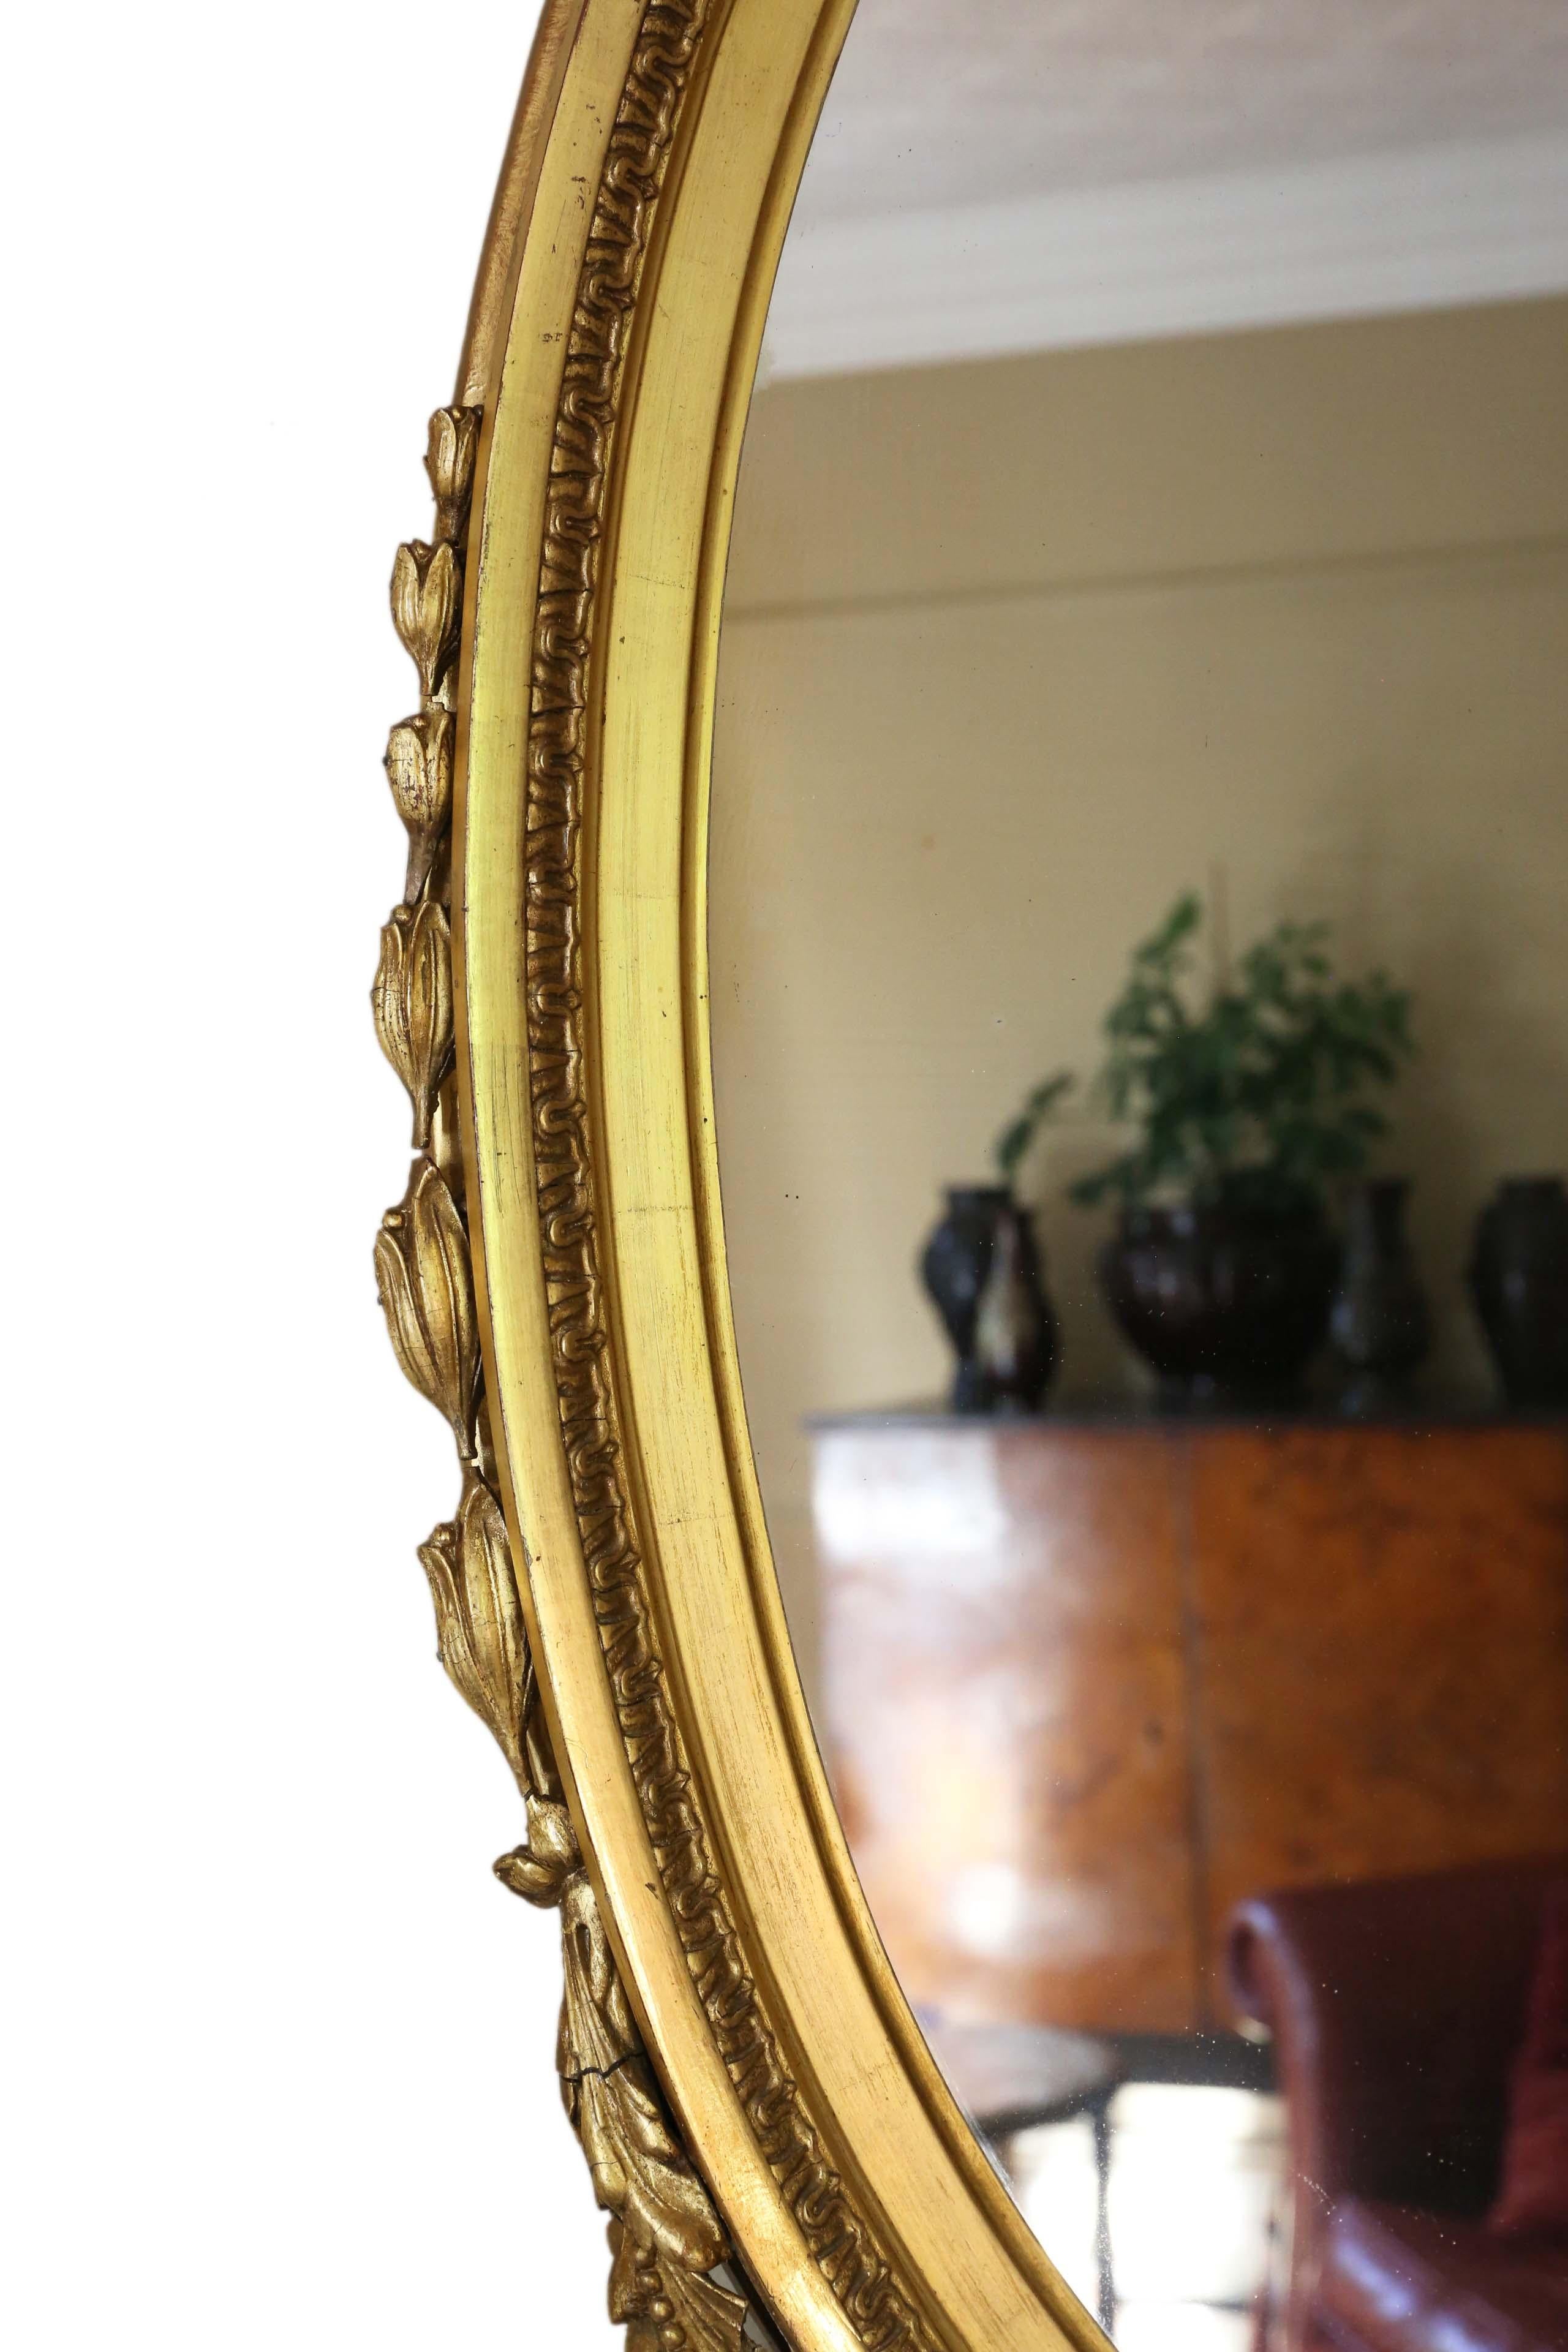 wall mirrors for sale